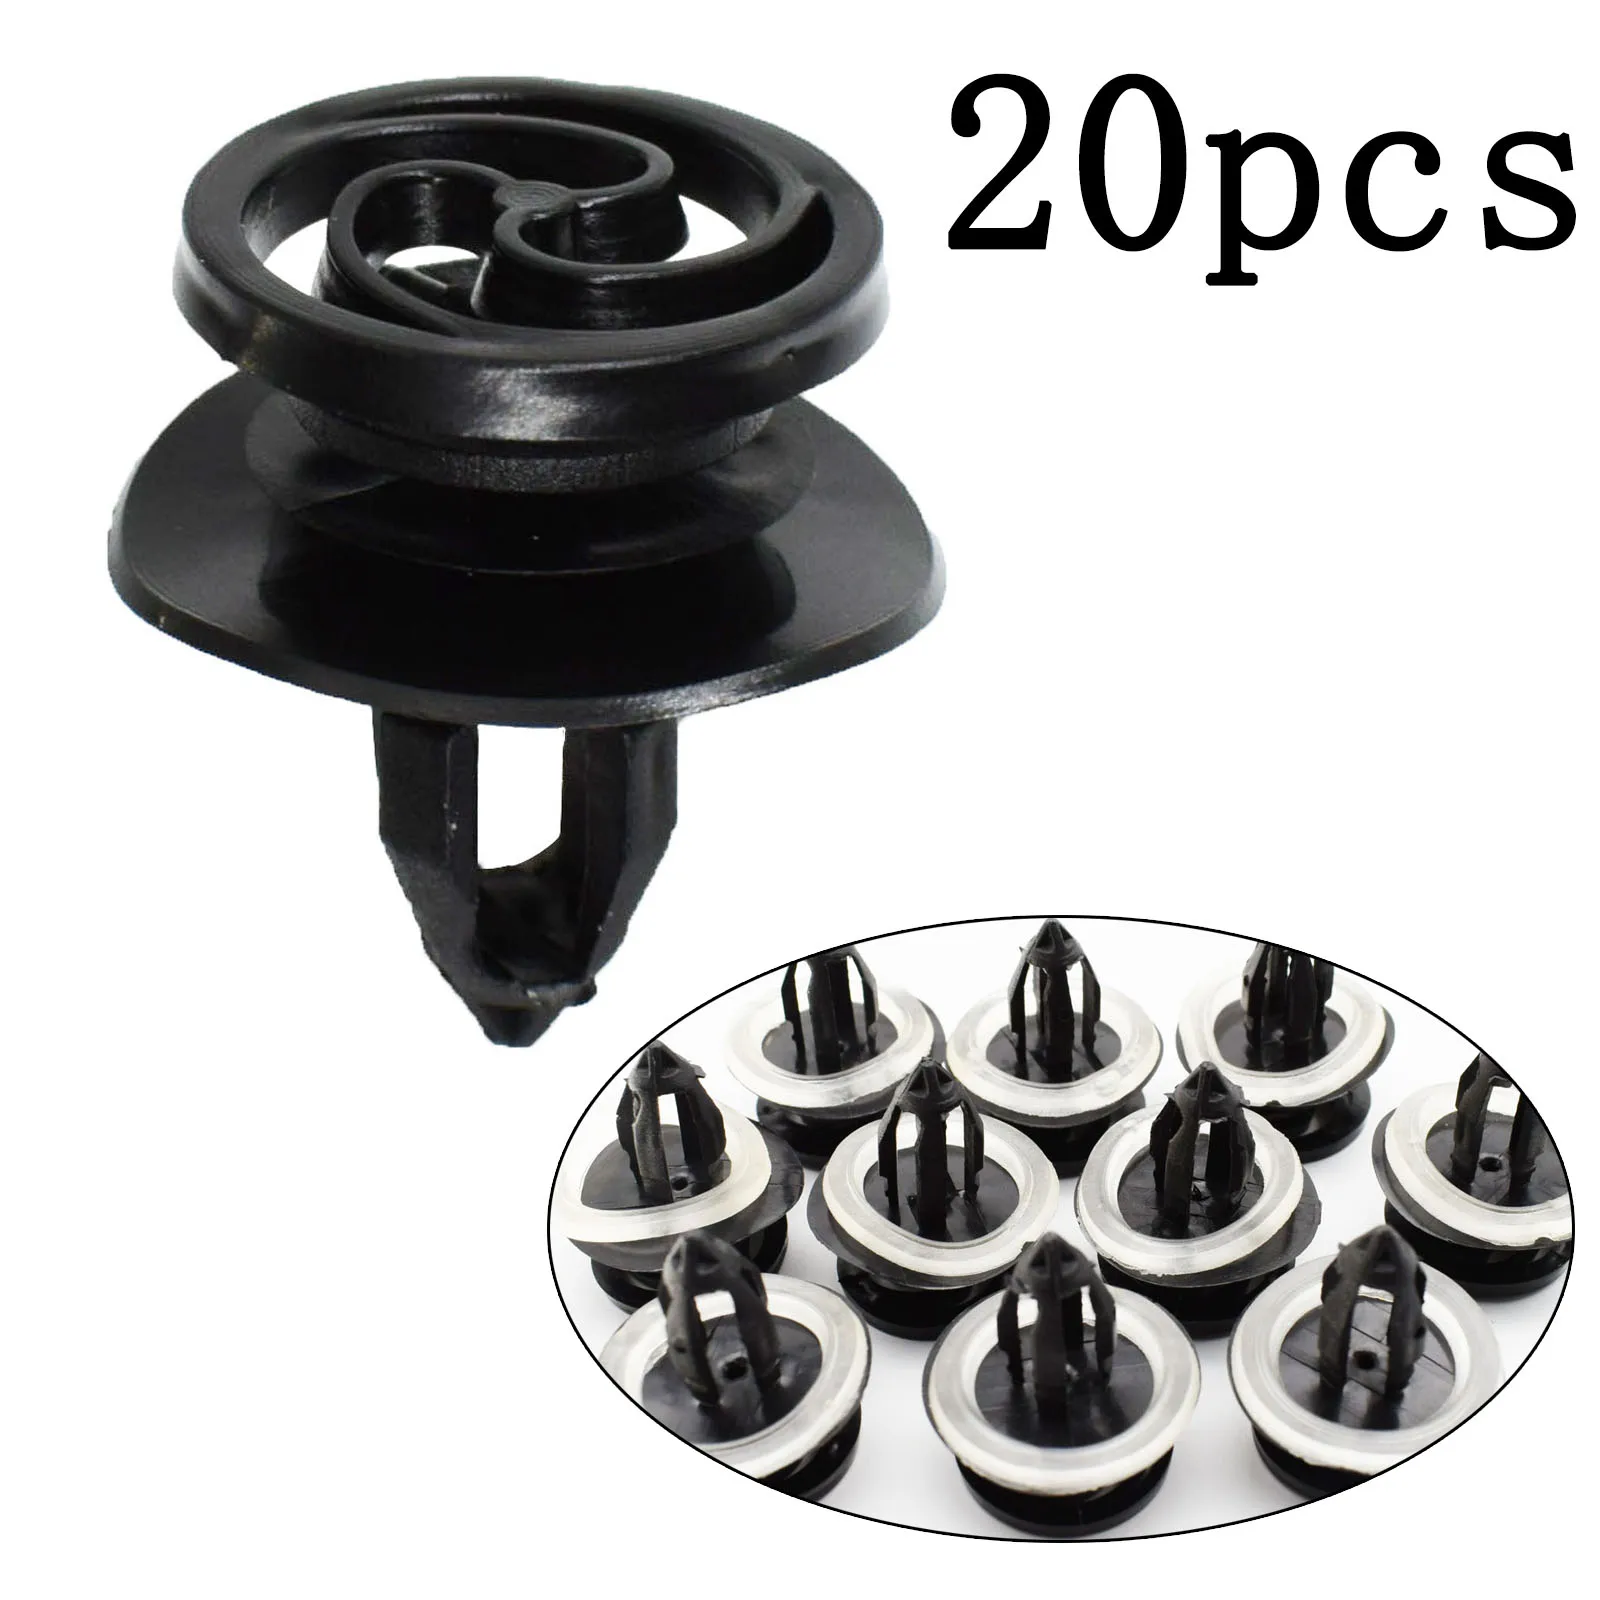 

20Pcs Trim Panel Clips Moulding Fixing Interior Headlining Lining Grommets Retainer Fastener Car Accessories Styling For Audi A4